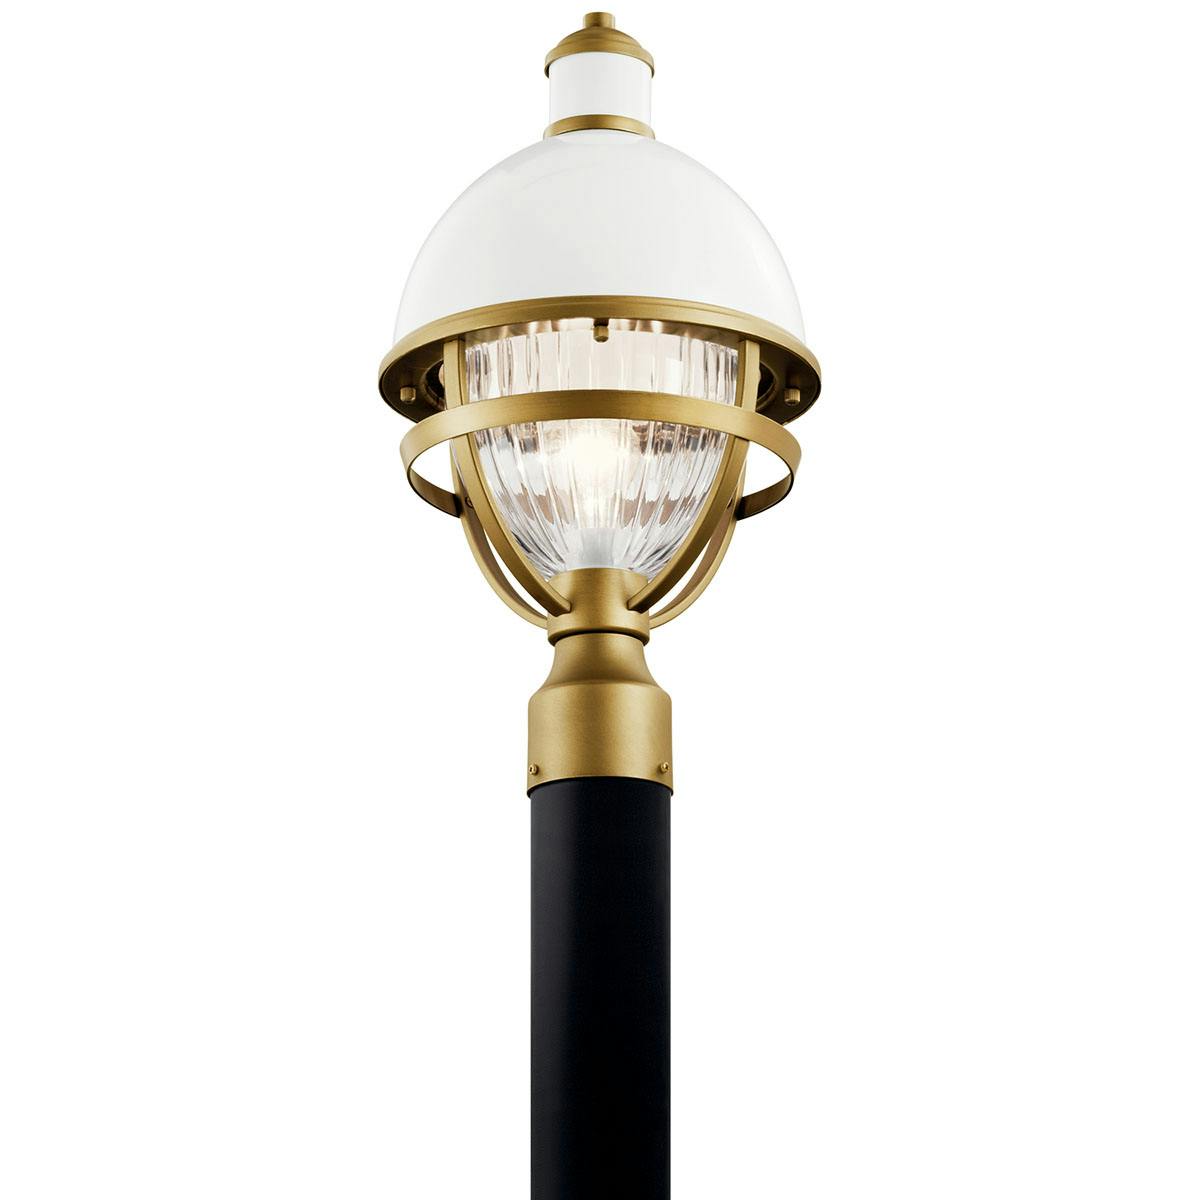 Profile view of the Tollis 1 Light Post Light White and Brass on a white background